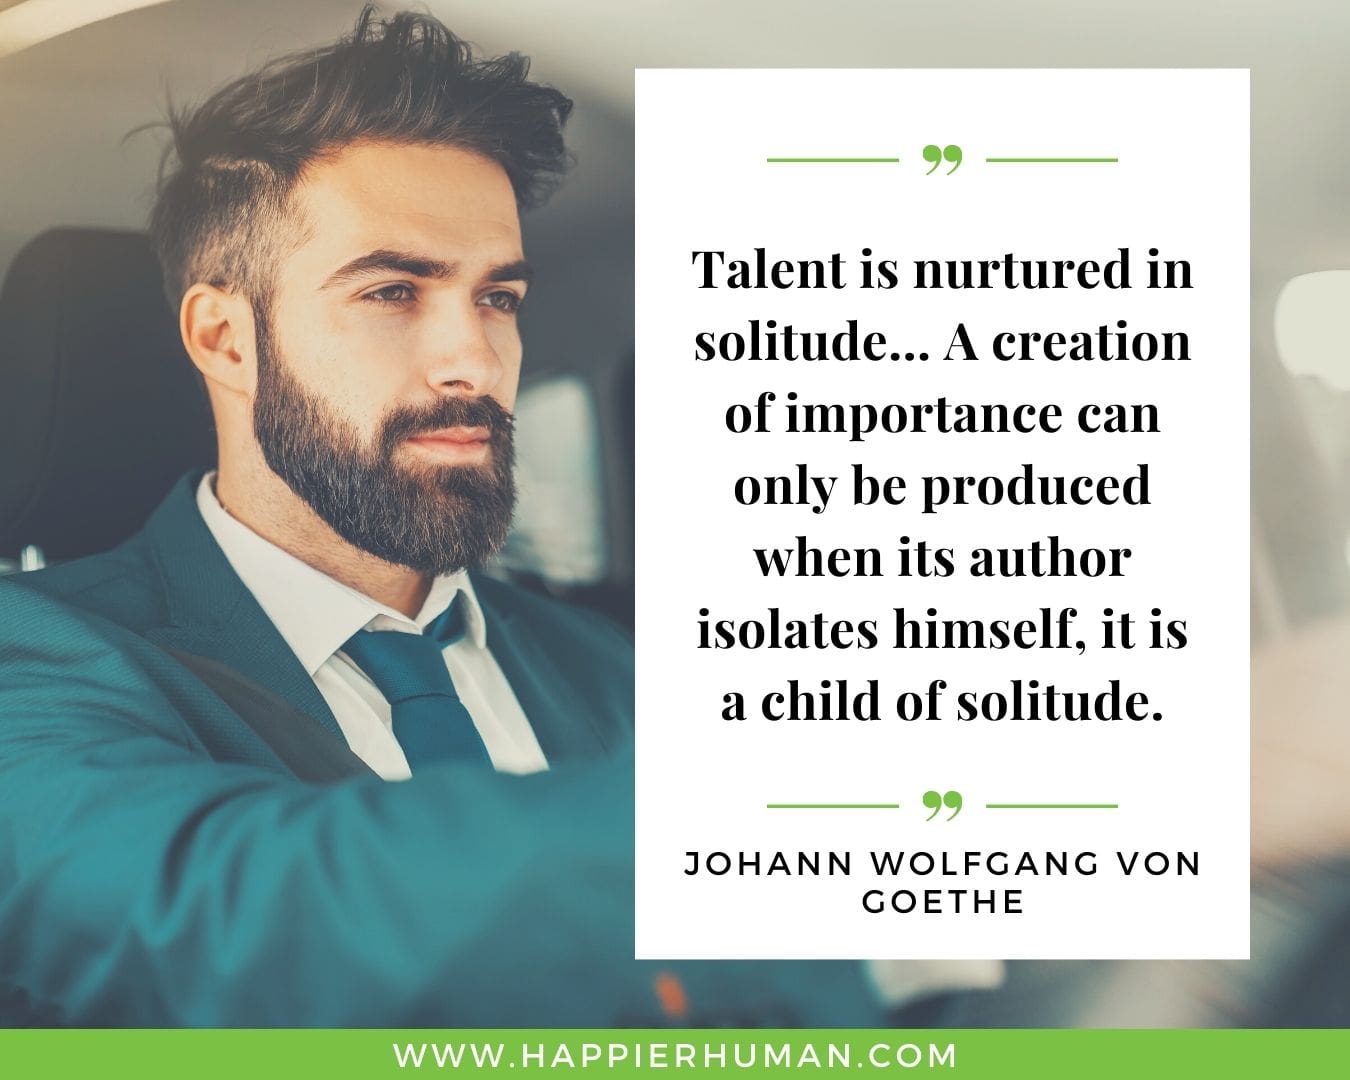 Loneliness Quotes - “Talent is nurtured in solitude… A creation of importance can only be produced when its author isolates himself, it is a child of solitude.”– Johann Wolfgang Von Goethe